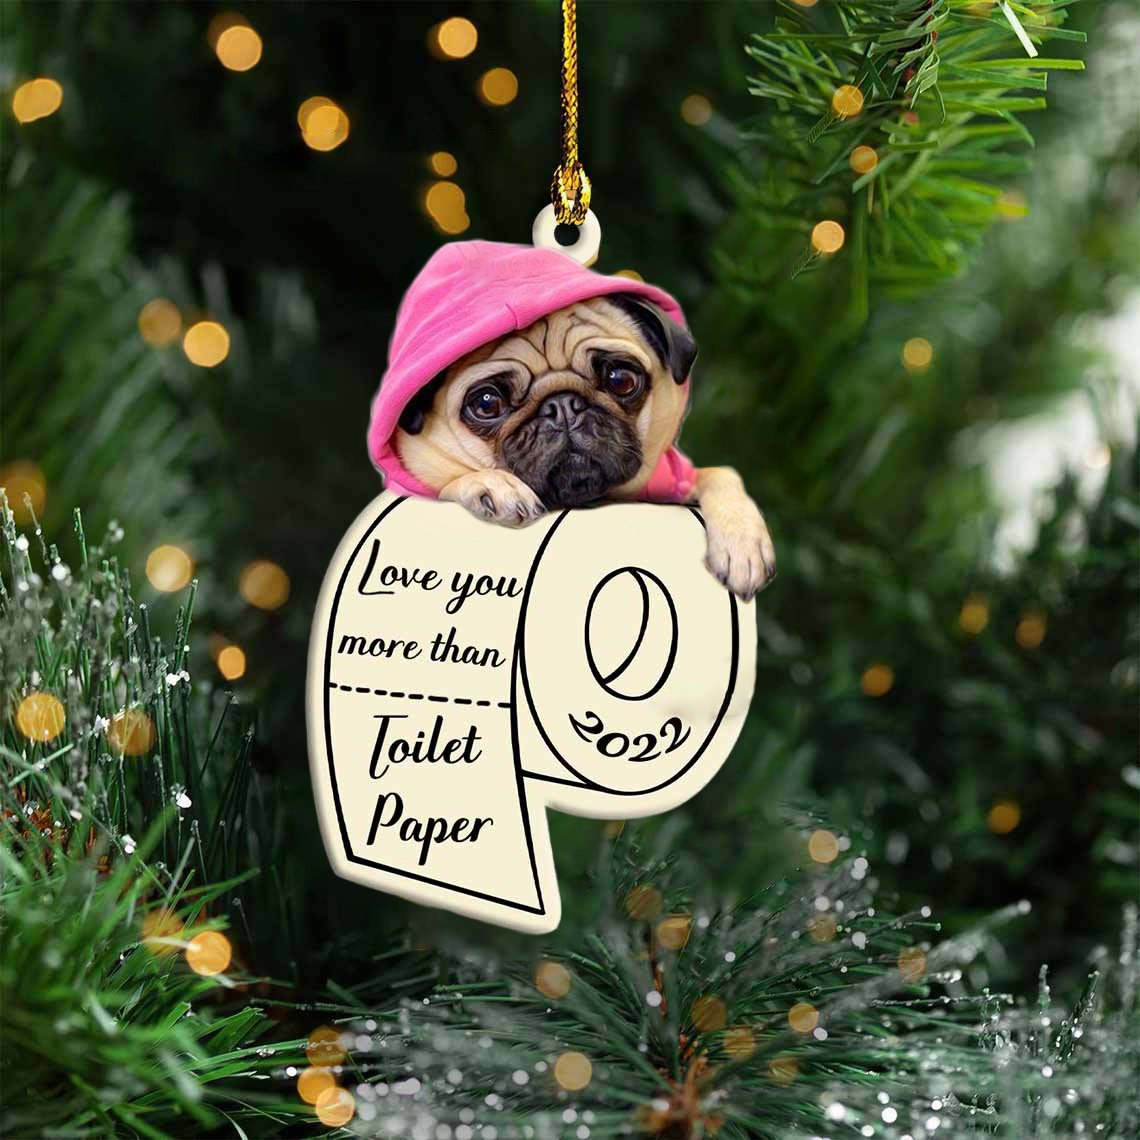 Pug Love You More Than Toilet Paper 2022 Hanging Ornament